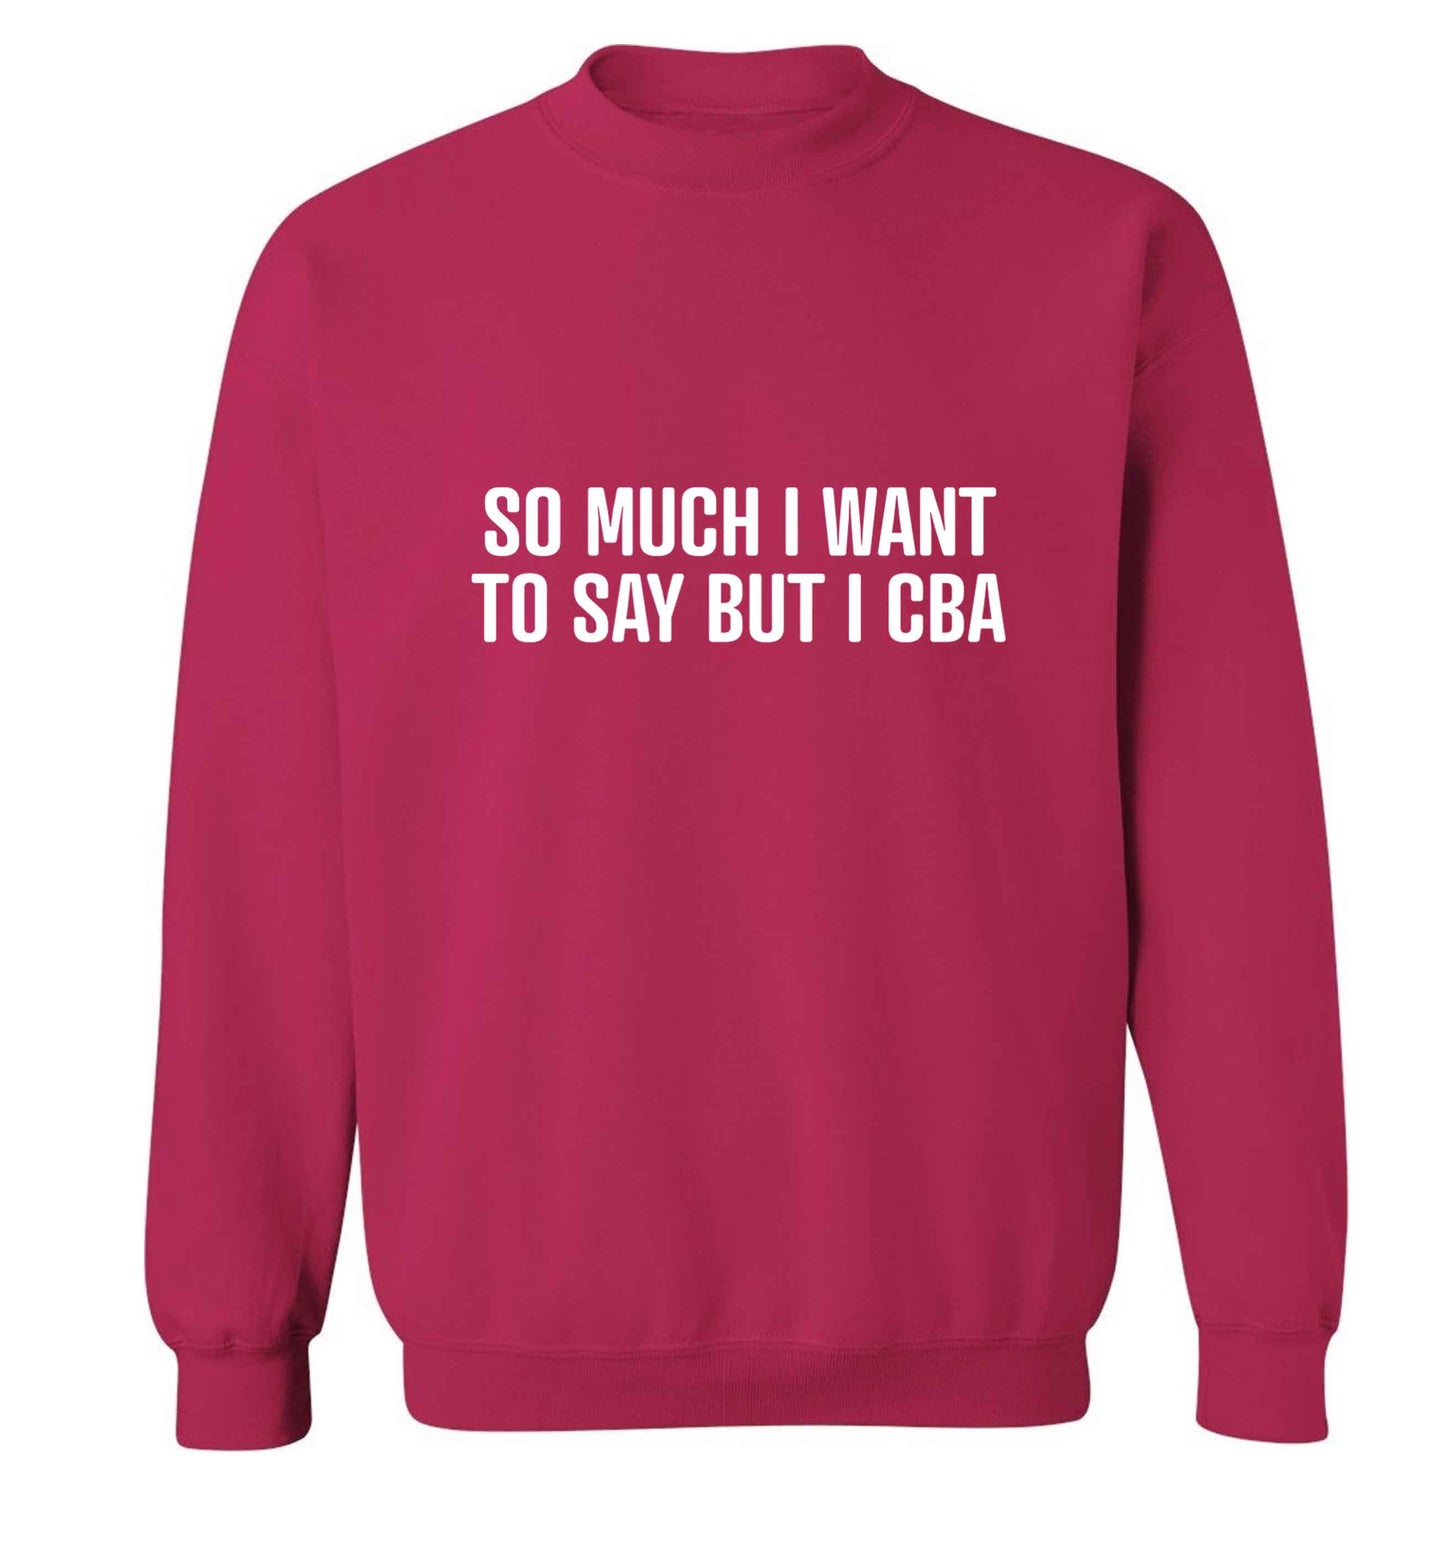 So much I want to say I cba  adult's unisex pink sweater 2XL